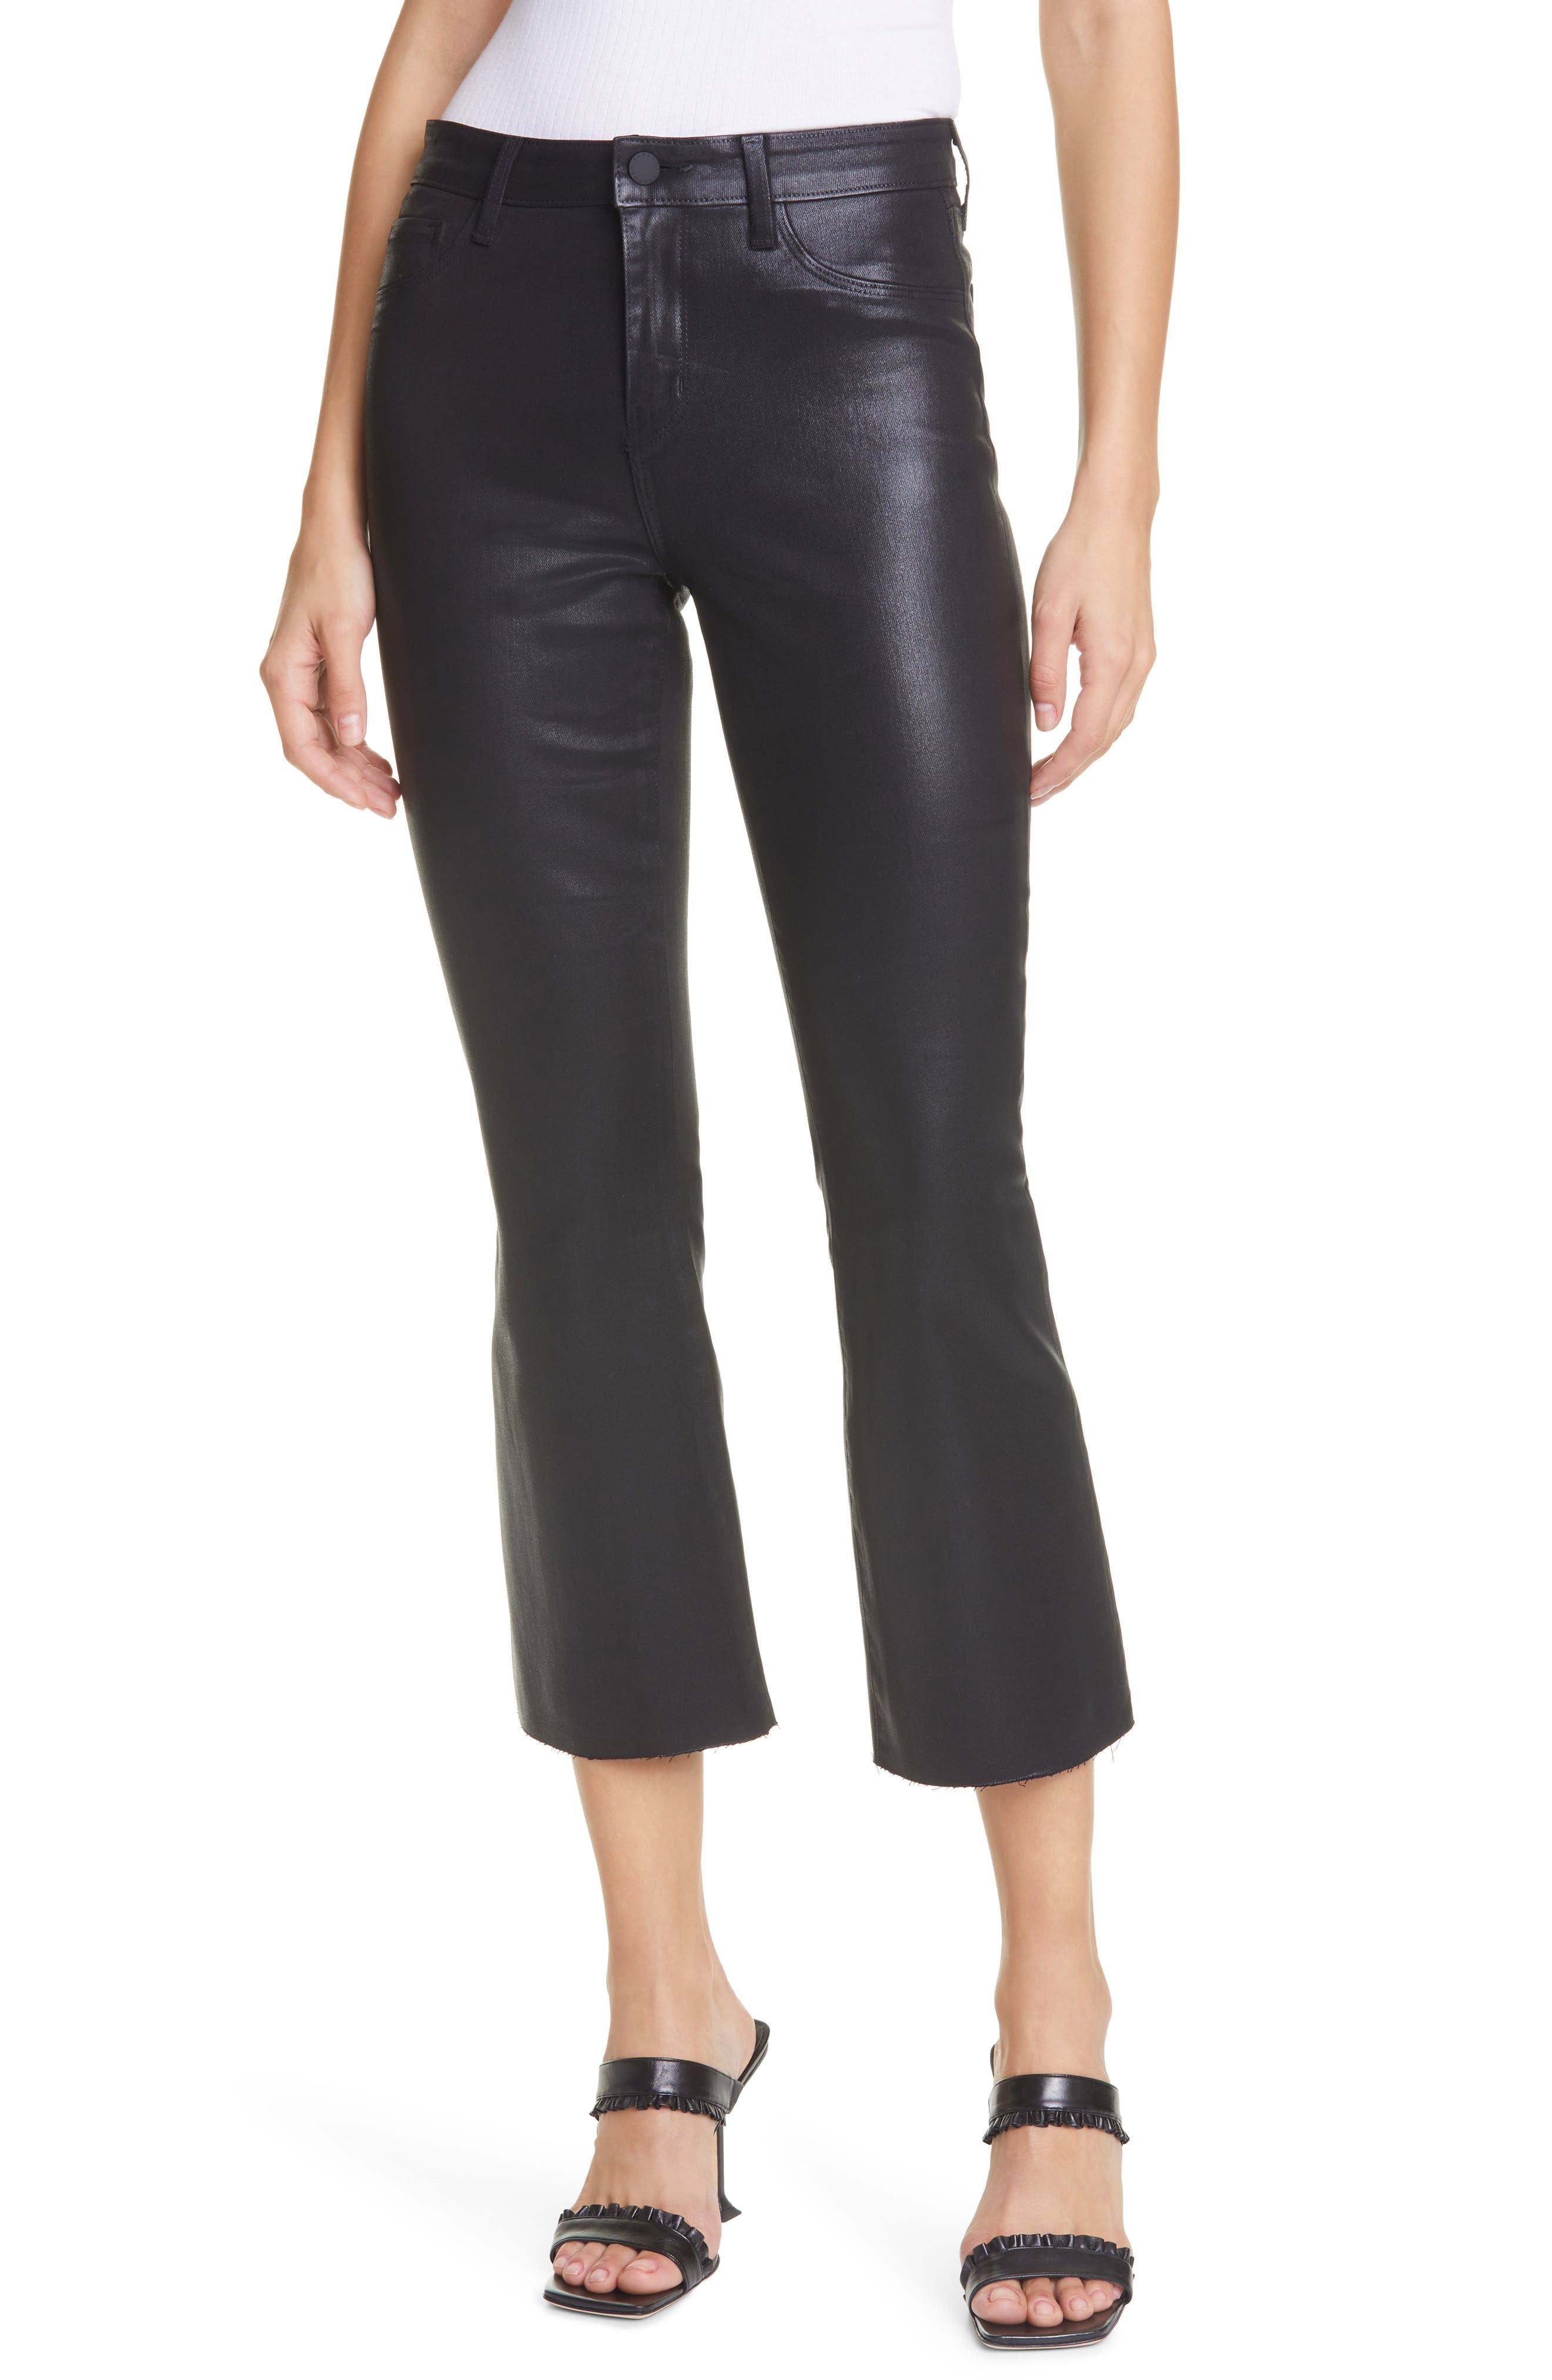 L'AGENCE Kendra Coated High Waist Crop Flare Jeans in Noir Coated at Nordstrom